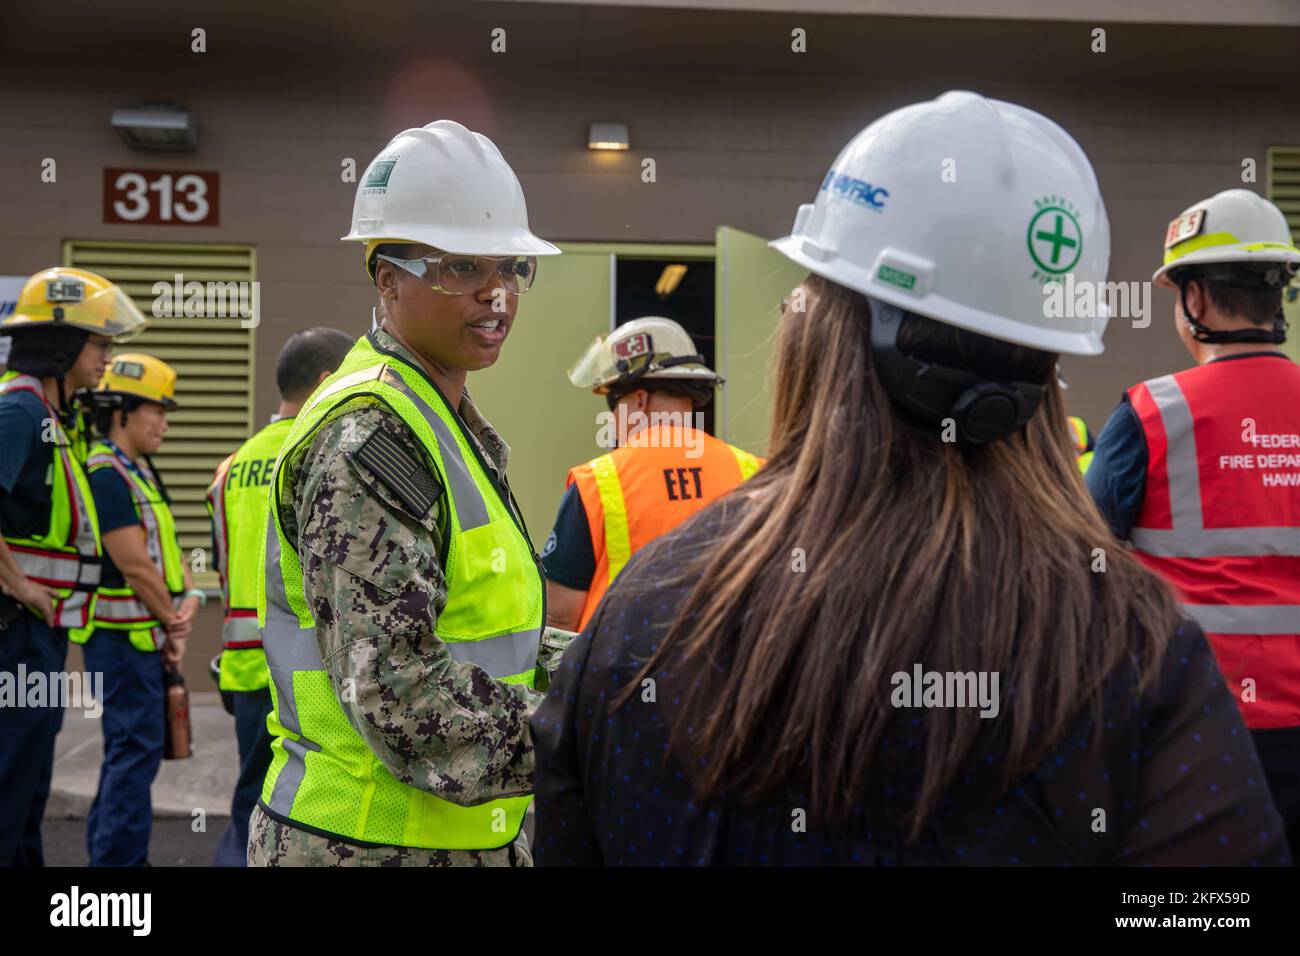 U.S. Navy Lt. Cmdr. Malia Gonzalez, Joint Task Force-Red Hill (JTF-RH) Safety Advisor, speaks with a stakeholder representative during a Red Hill Bulk Fuel Storage Facility (RHBFSF) Stakeholder Safety Walkthrough at the facility in Halawa, Hawaii, Oct. 12, 2022. JTF-RH was established by the Department of Defense to ensure the safe and expeditious defueling of the RHBFSF. Stock Photo